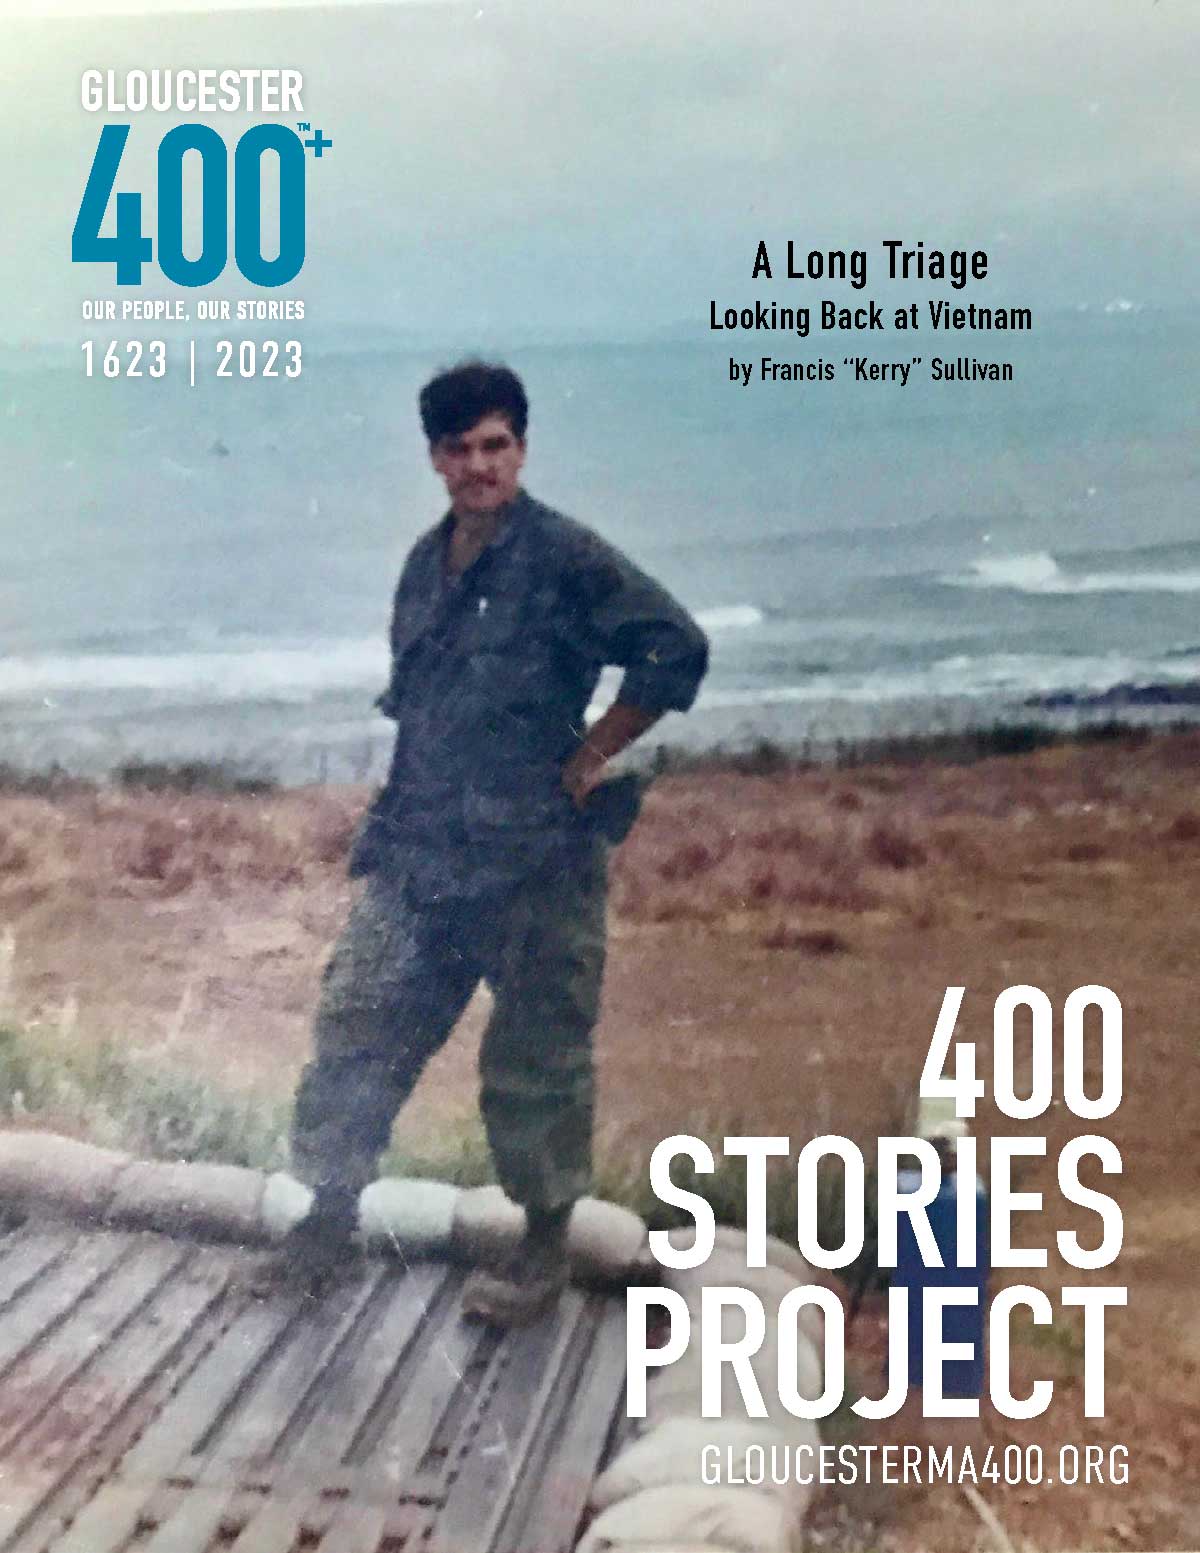 A Long Triage, Looking Back at Vietnam